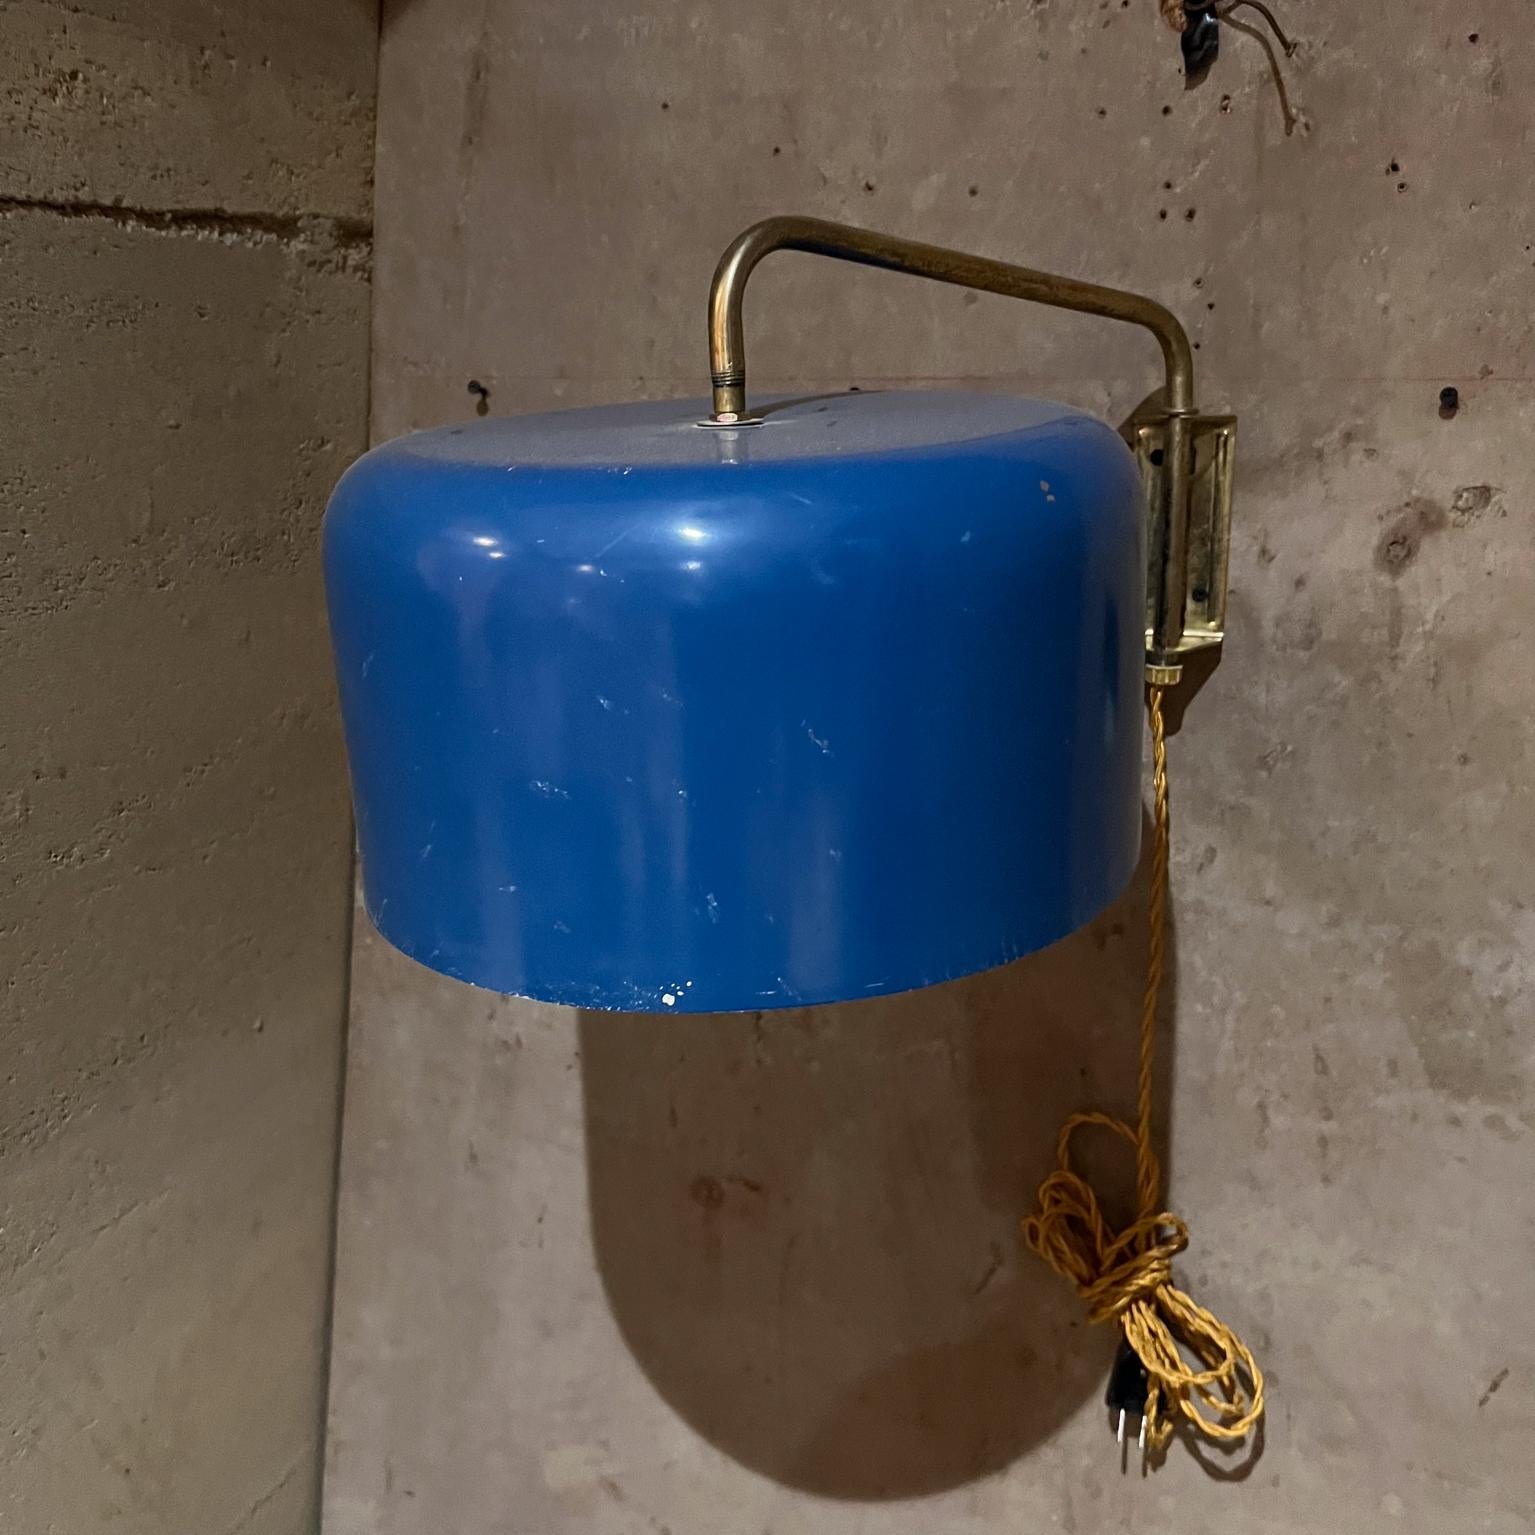 
Midcentury Modern Italian Blue Wall Sconce Lamp
unmarked style of Stilnovo
9 h x 18 d x 12.13 diameter
Unrestored original vintage condition
See all images.